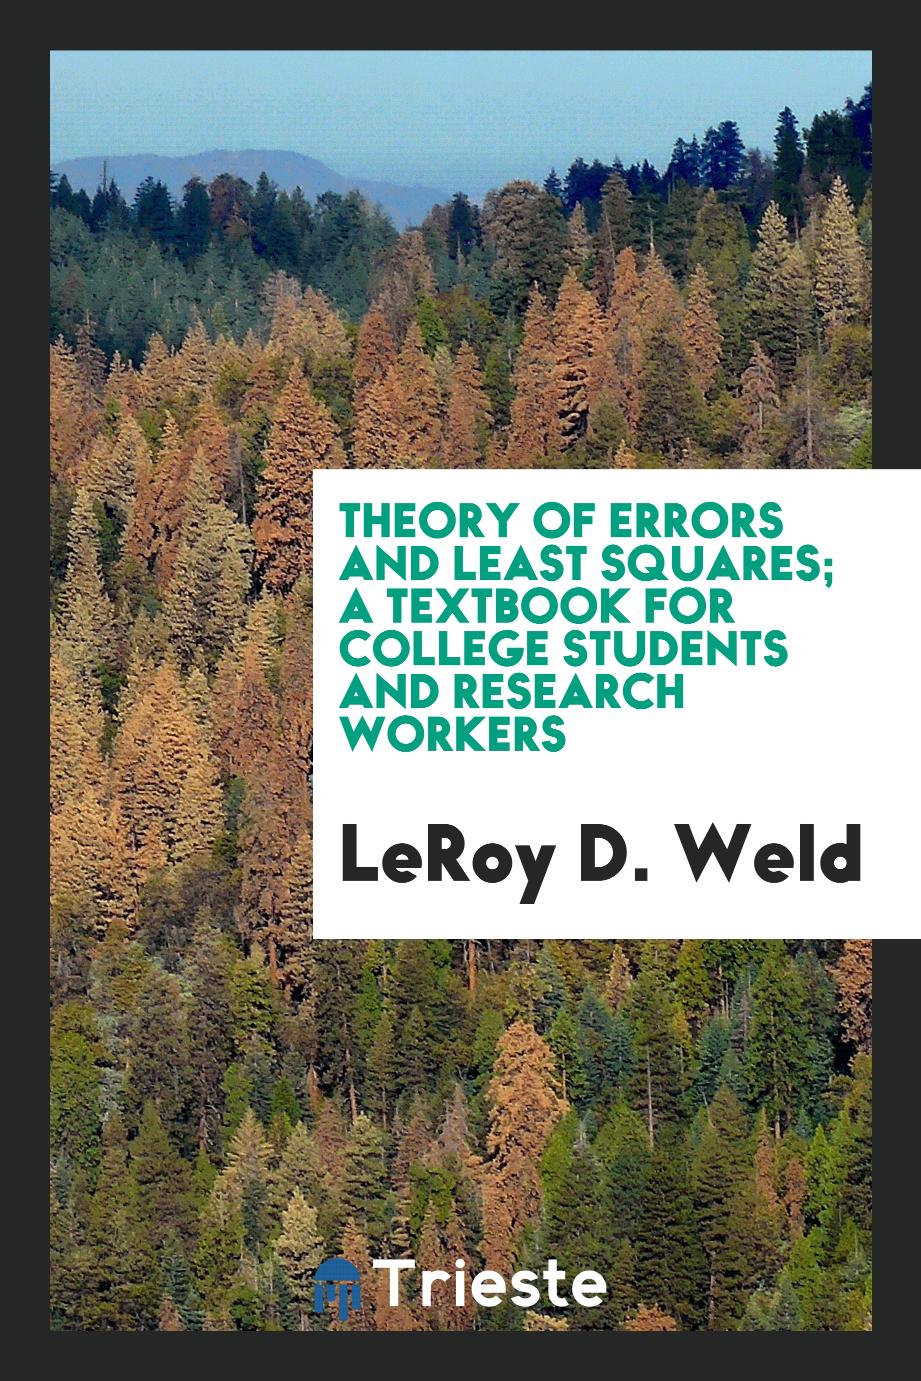 Theory of errors and least squares; a textbook for college students and research workers